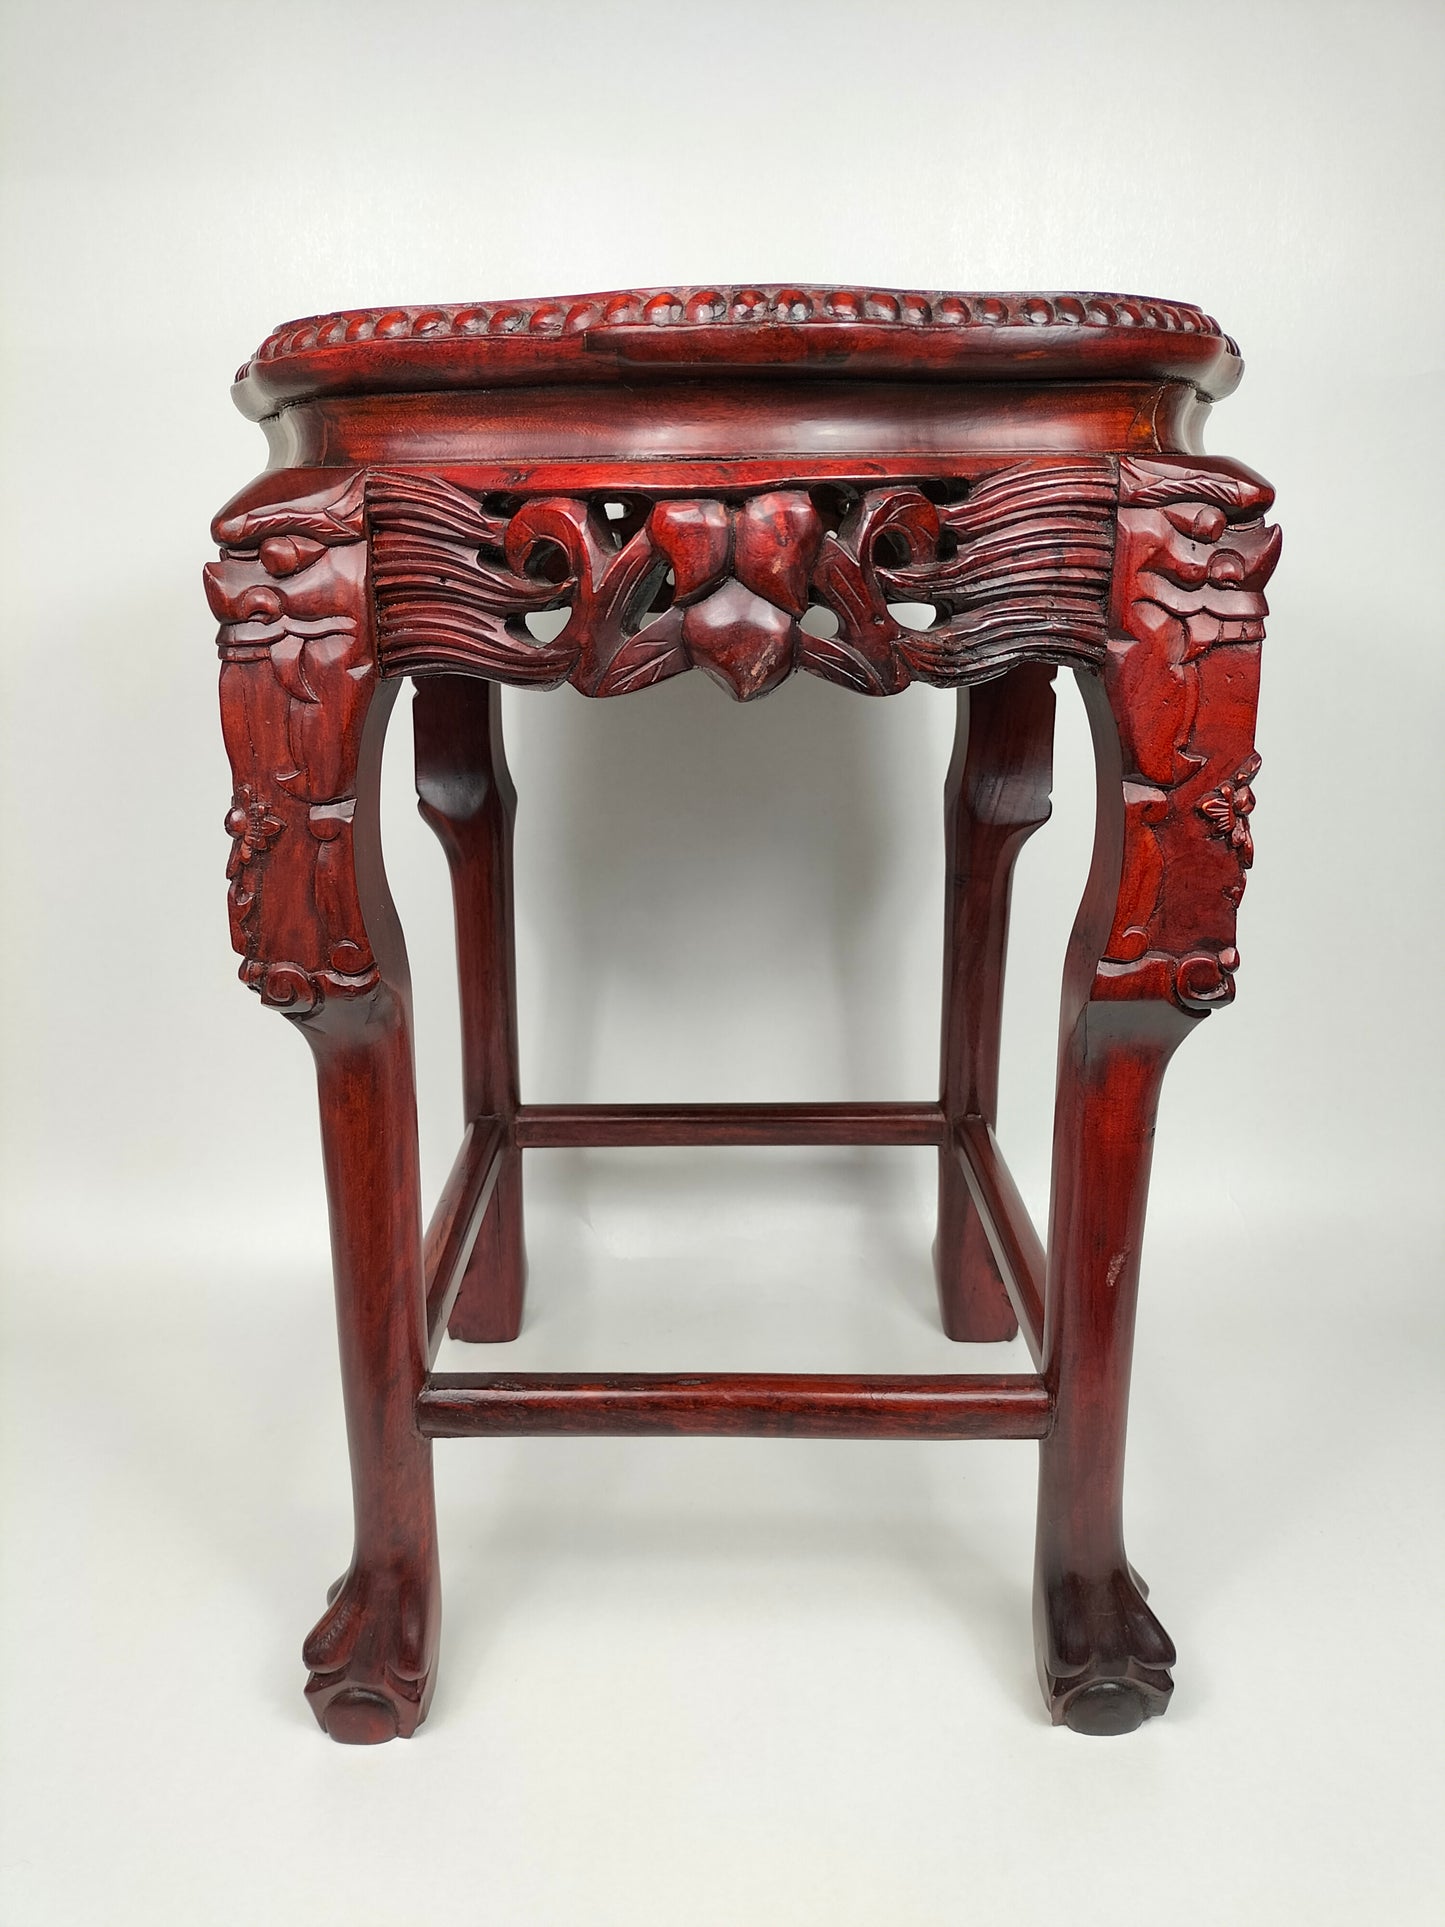 Chinese wooden side table inlaid with a marble top // Rosewood - 20th century